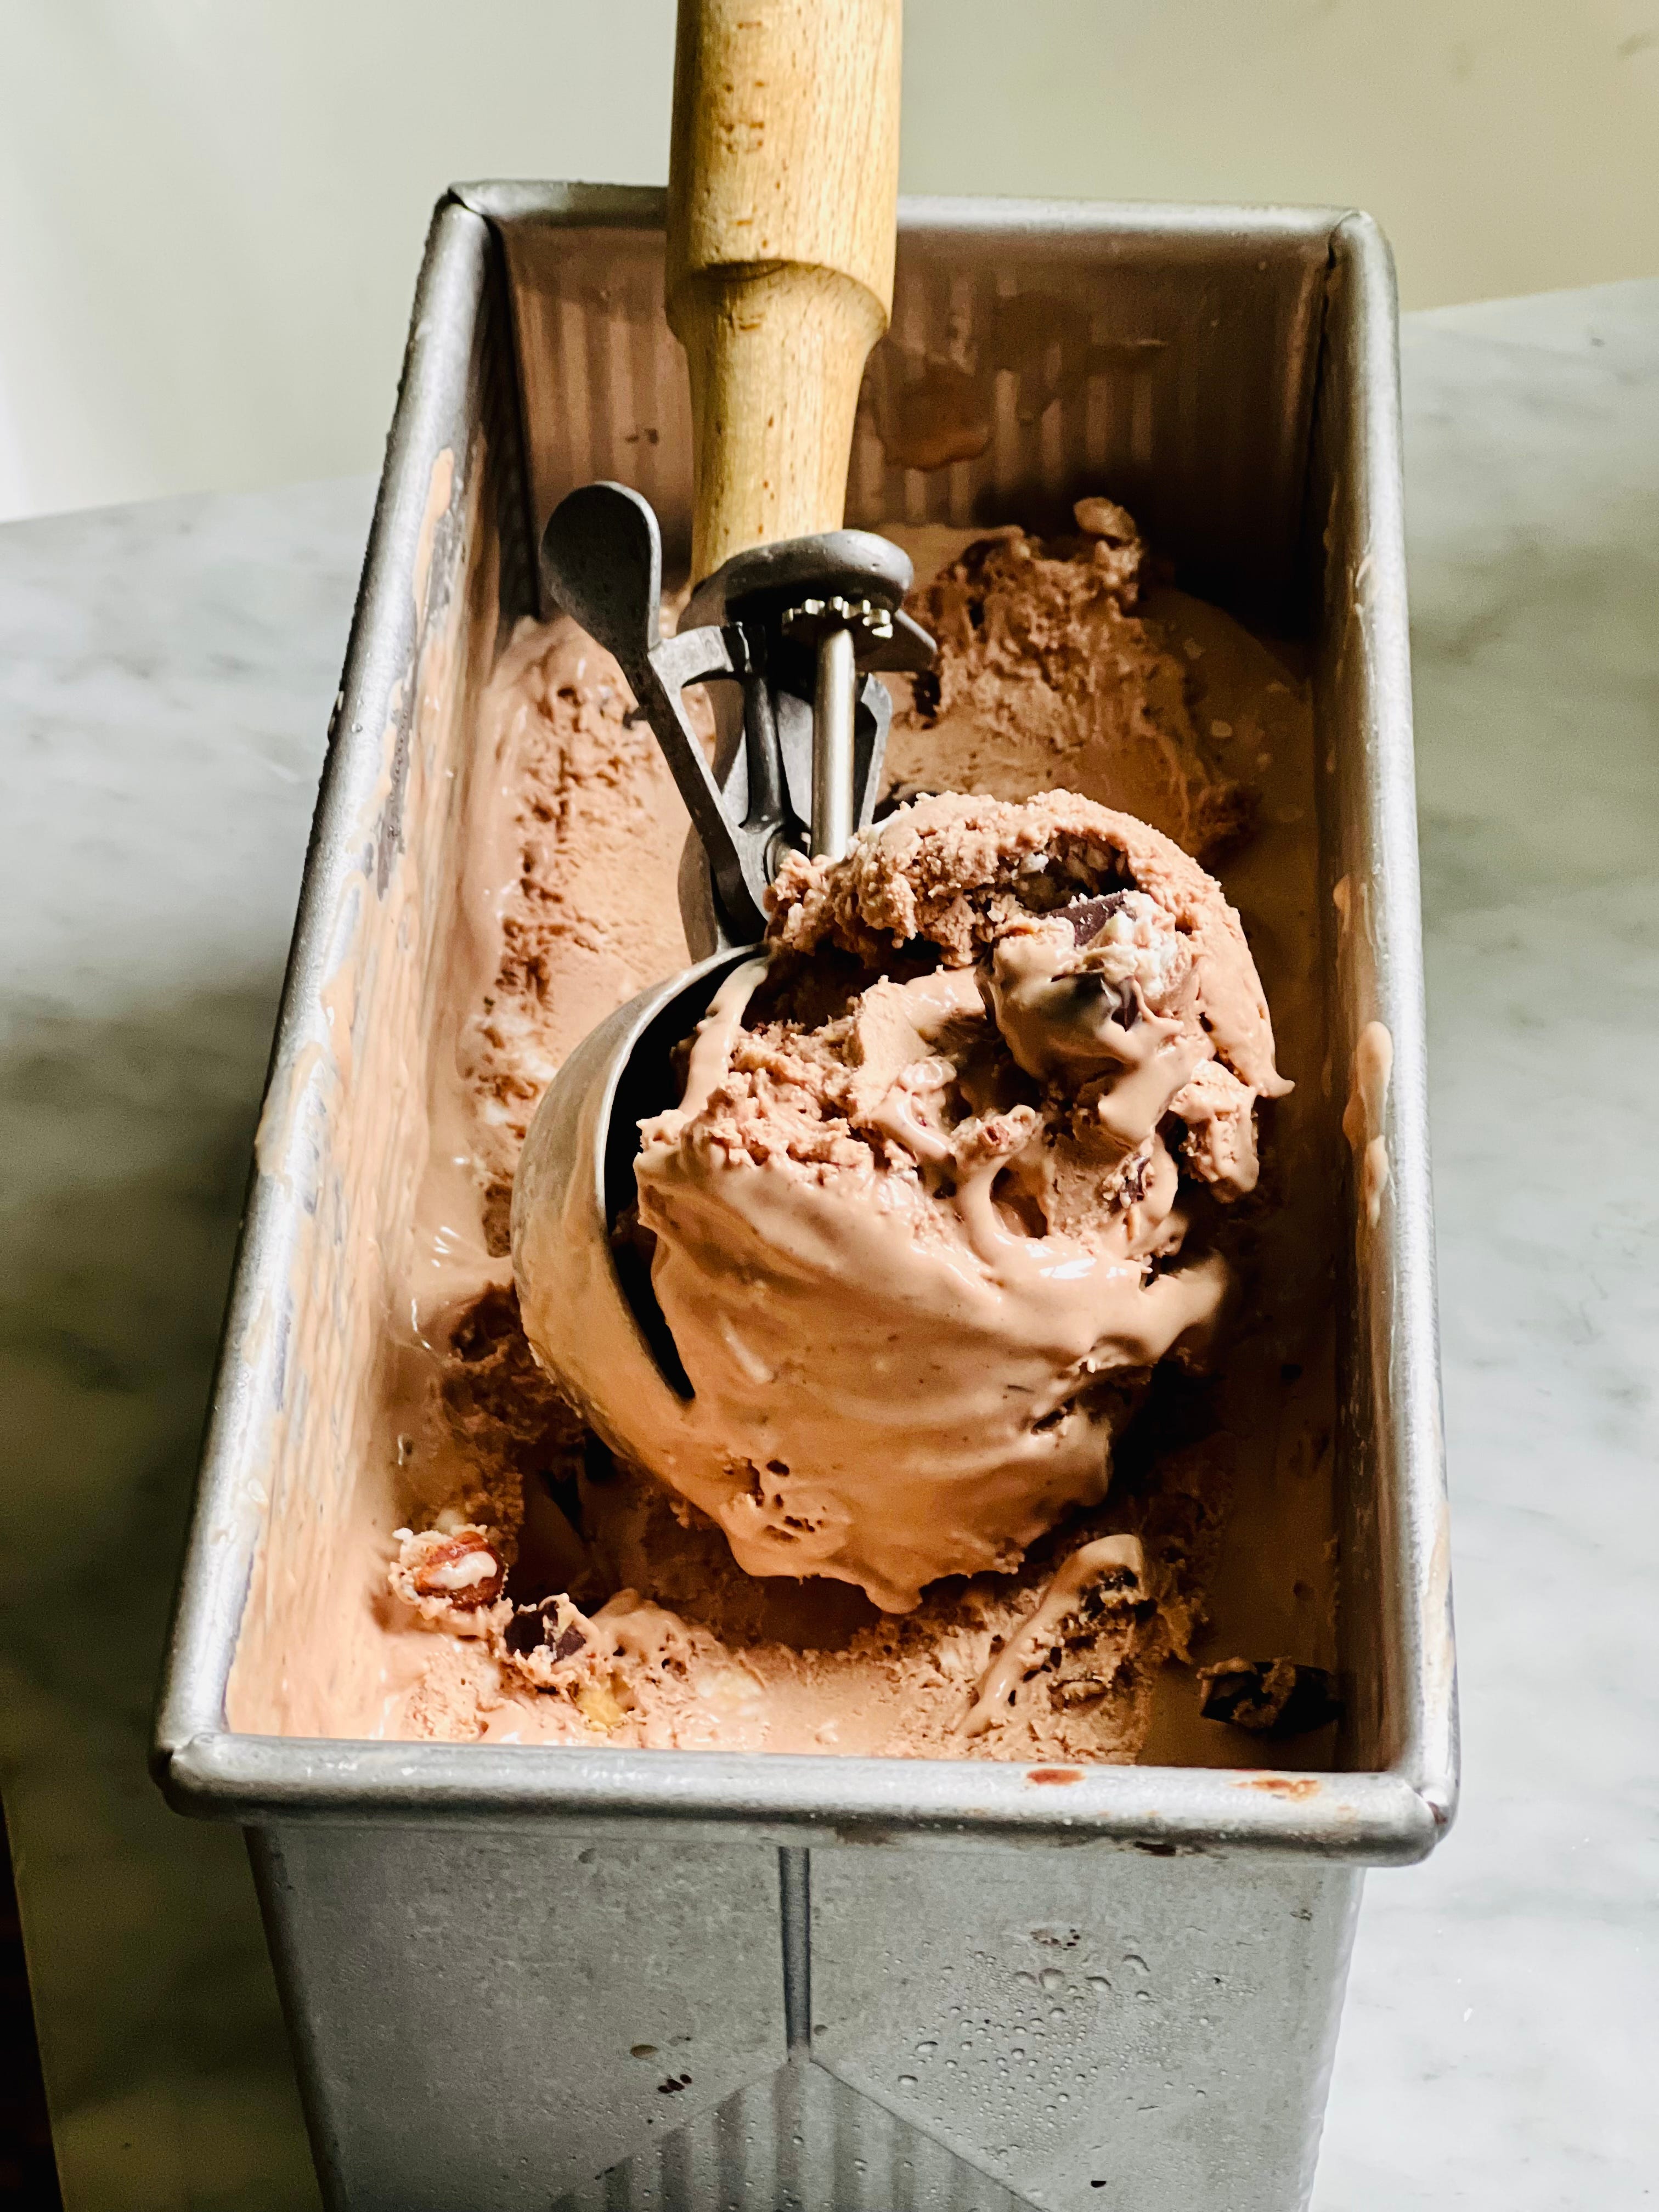 Ladonna's Toffy Ice Cream Maker makes it easy to make homemade ice cream  by hand! Just put in the ingredients and push the switch! []